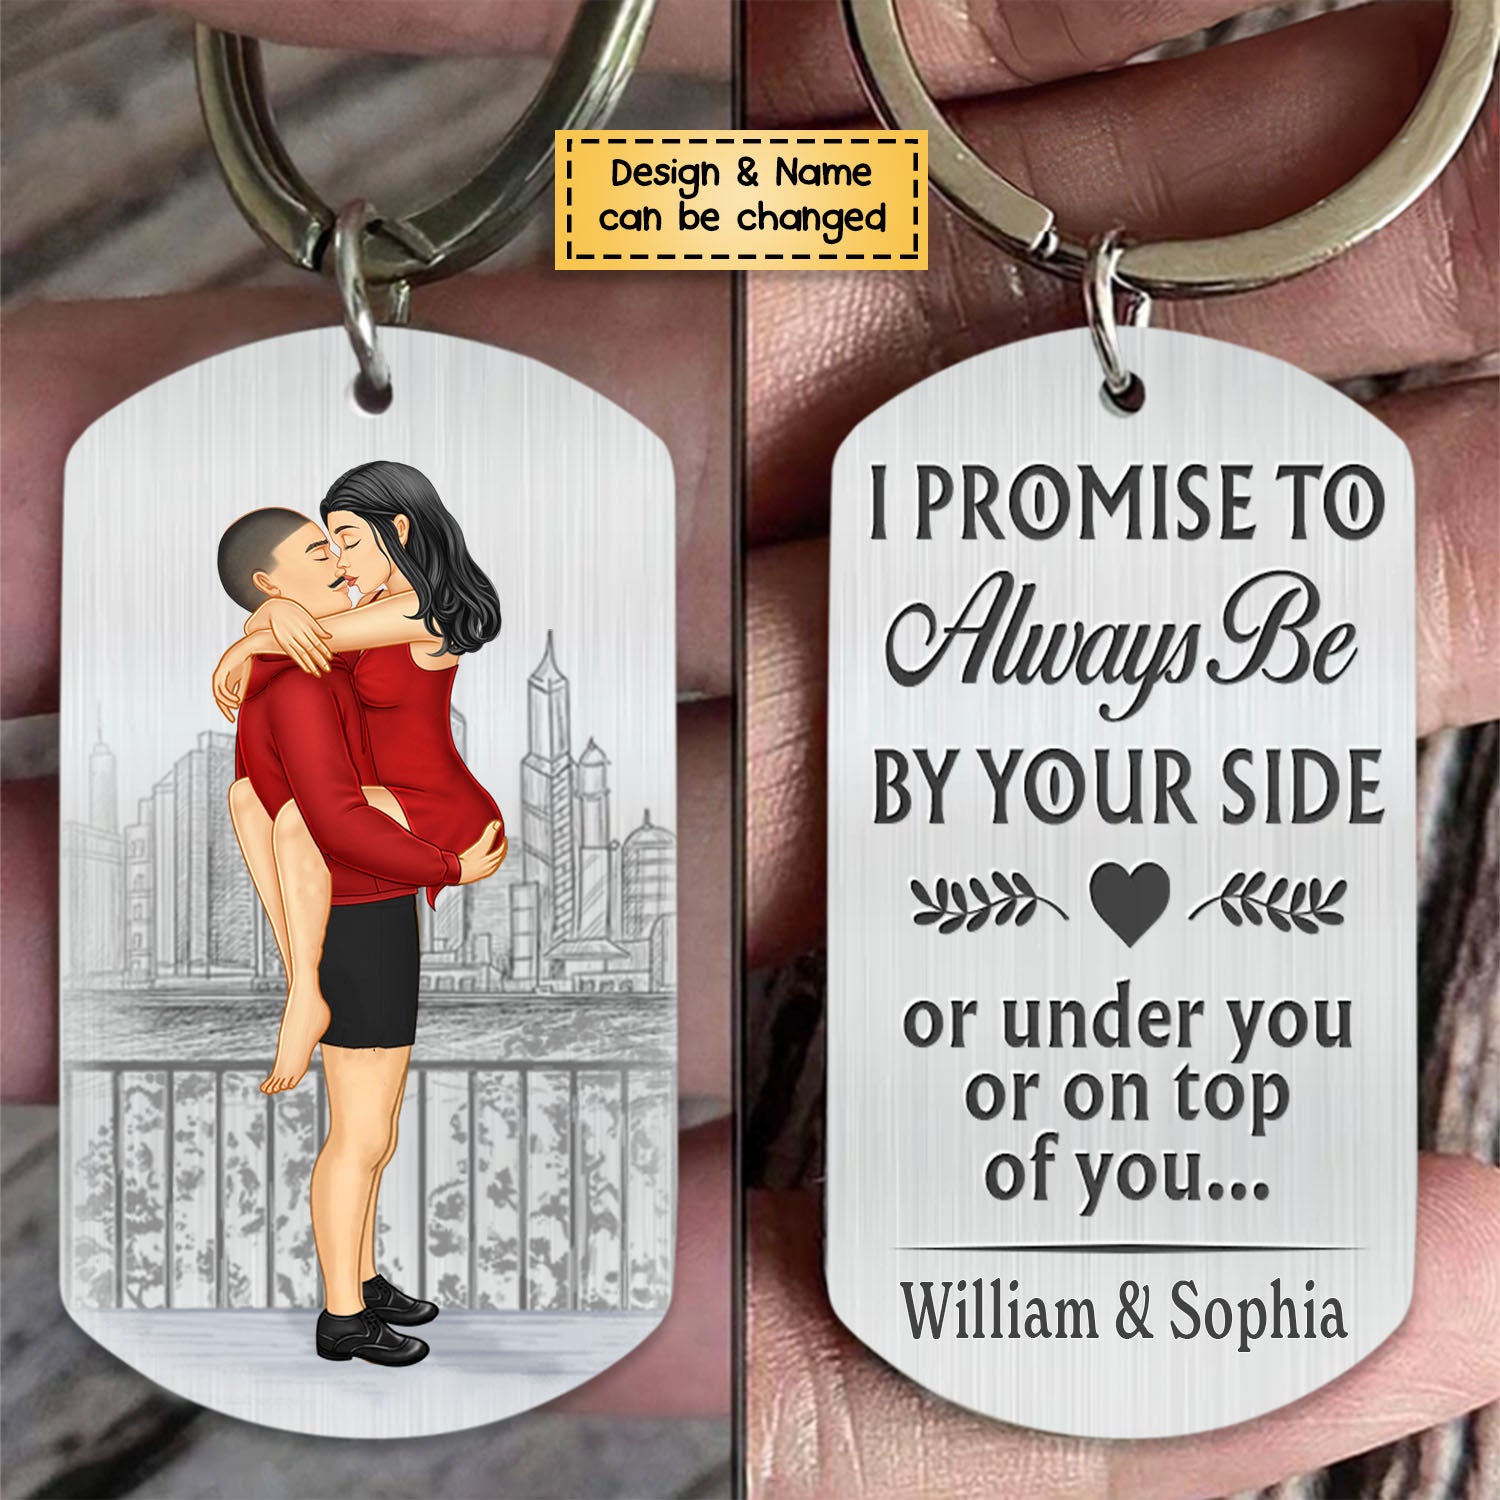 I Promise To-Personalized Stainless Steel Keychain - Gifts For Couple